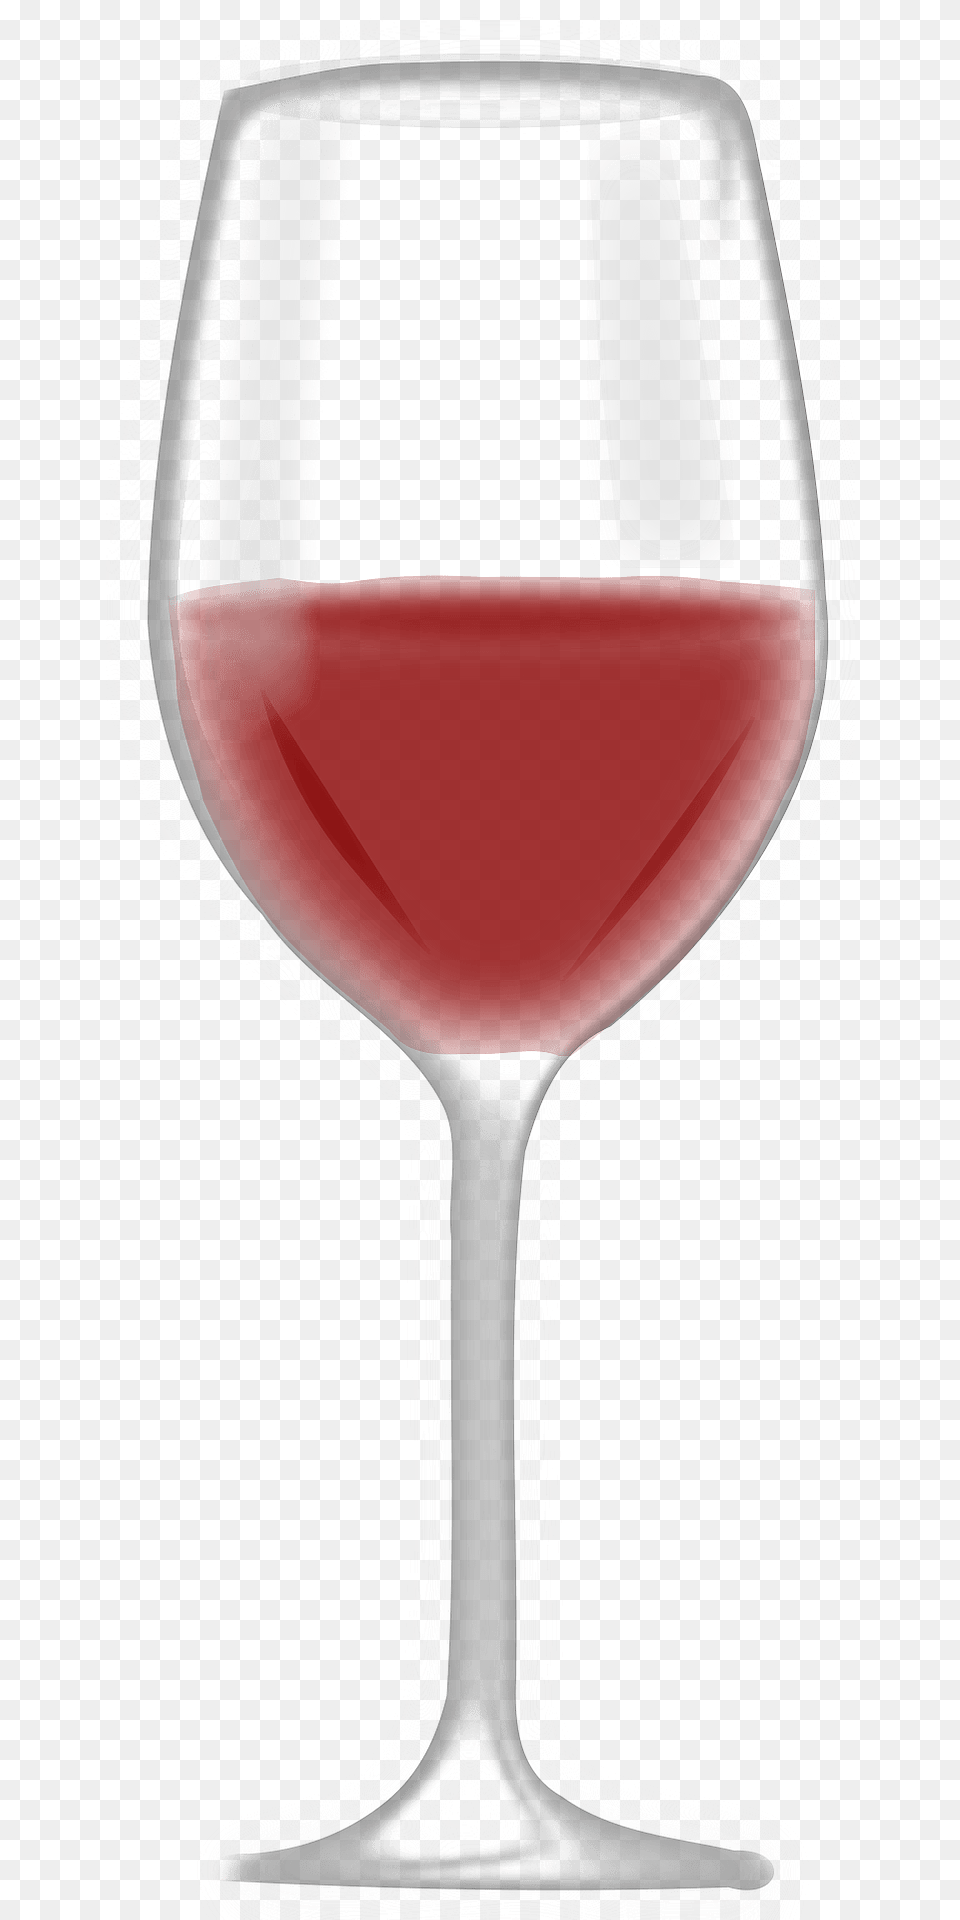 Glass Of Wine Clipart, Alcohol, Beverage, Liquor, Red Wine Free Transparent Png